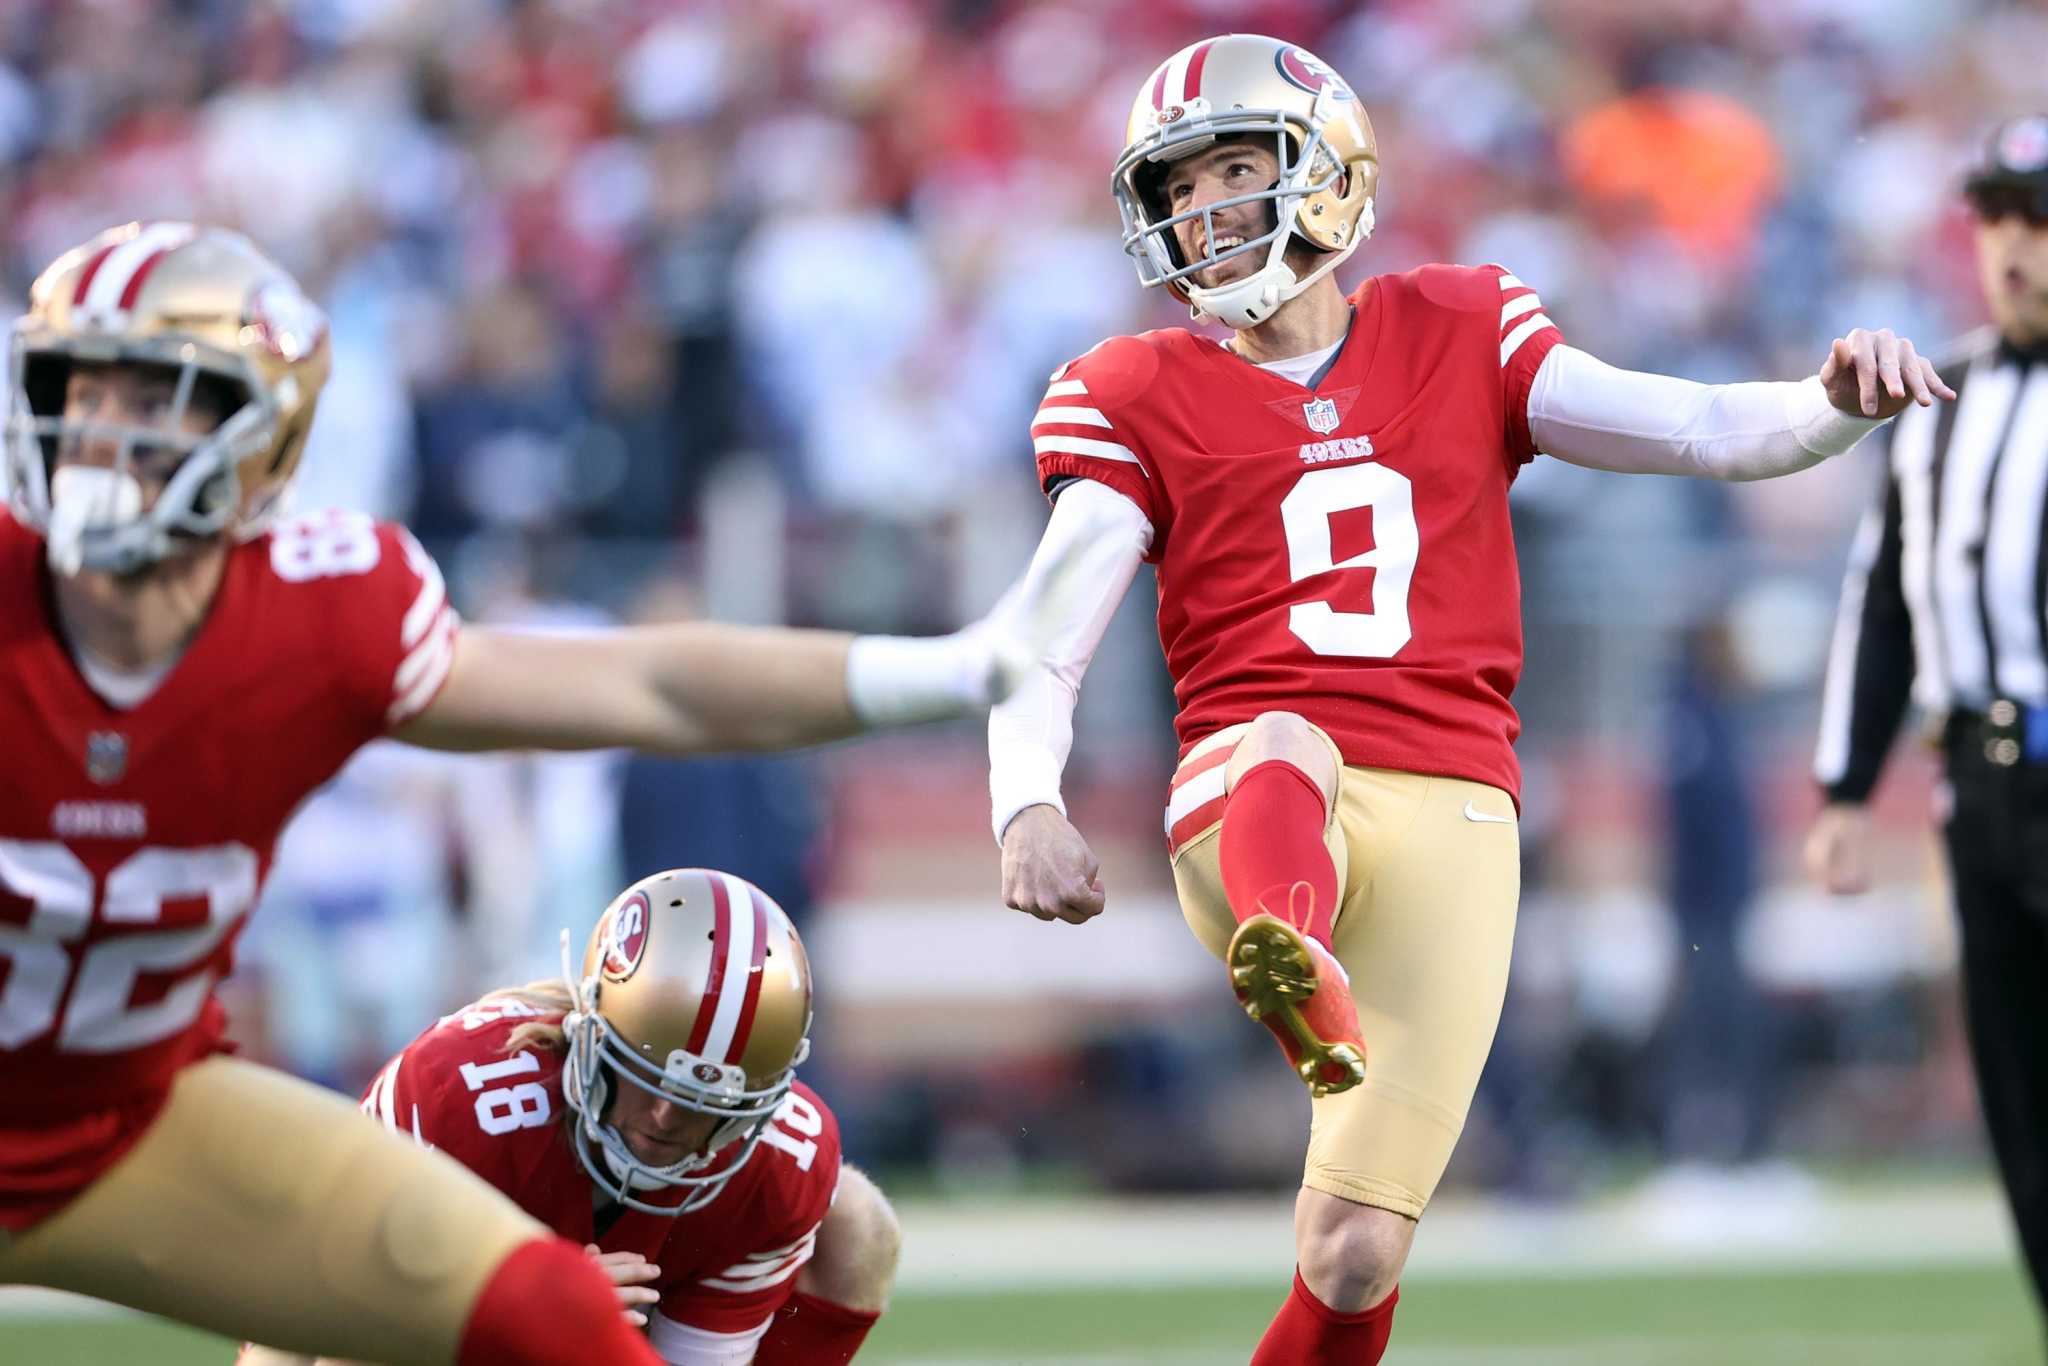 49ers kicker Robbie Gould's secret to staying perfect? 'I just